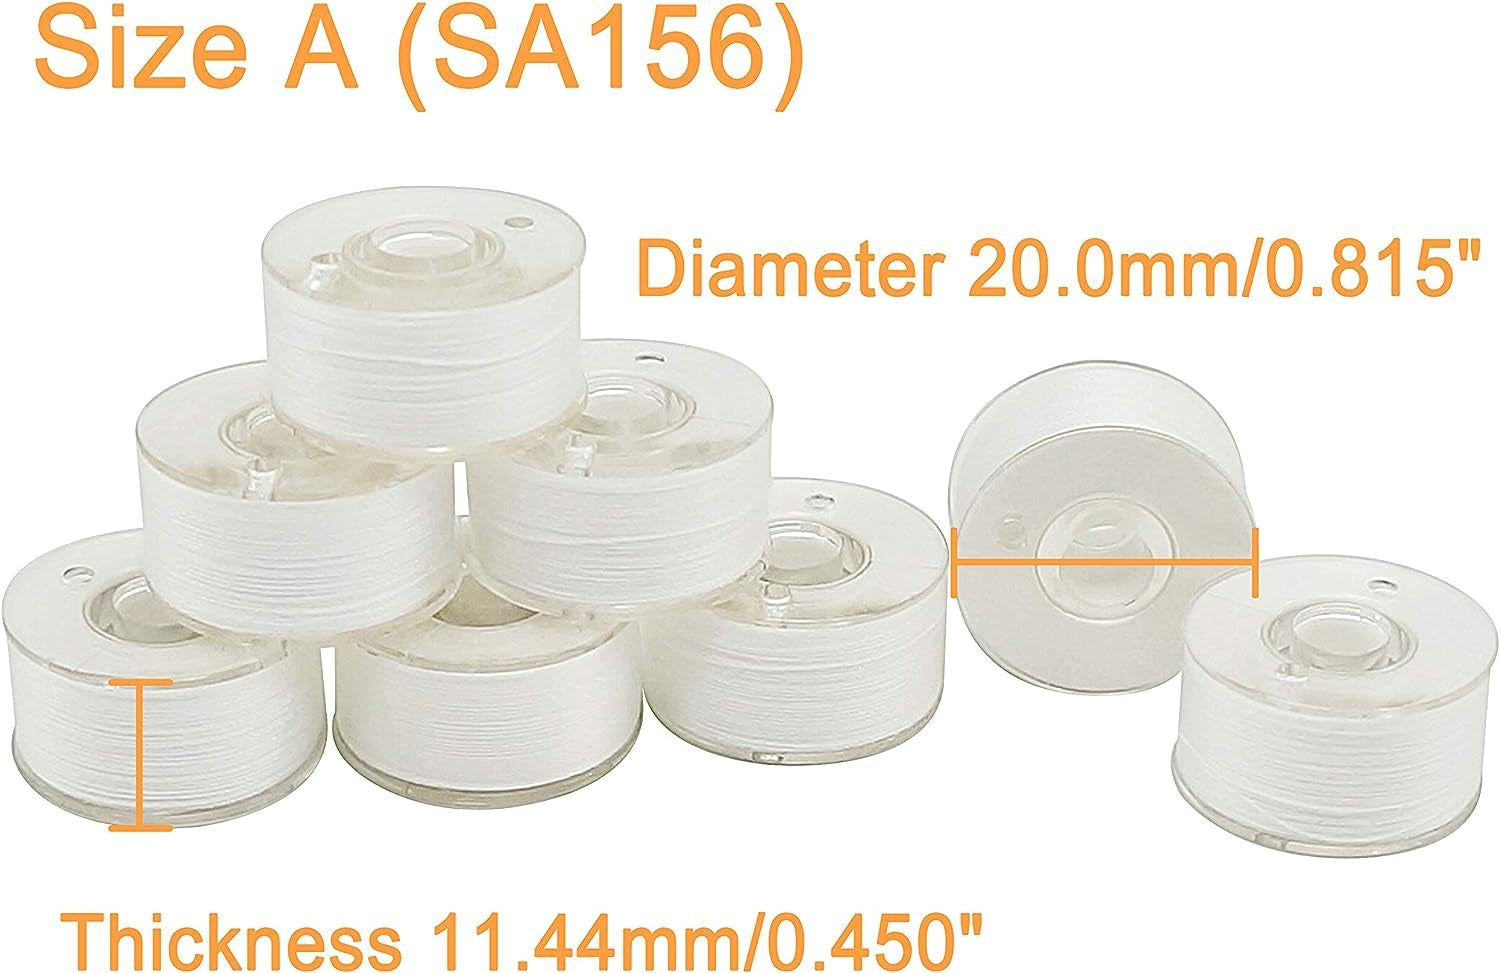 144Pcs White 60S/2(90WT) Prewound Bobbin Thread Plastic Size a SA156 for Embroidery and Sewing Machine Cottonized Soft Feel Polyester Thread Sewing Thread